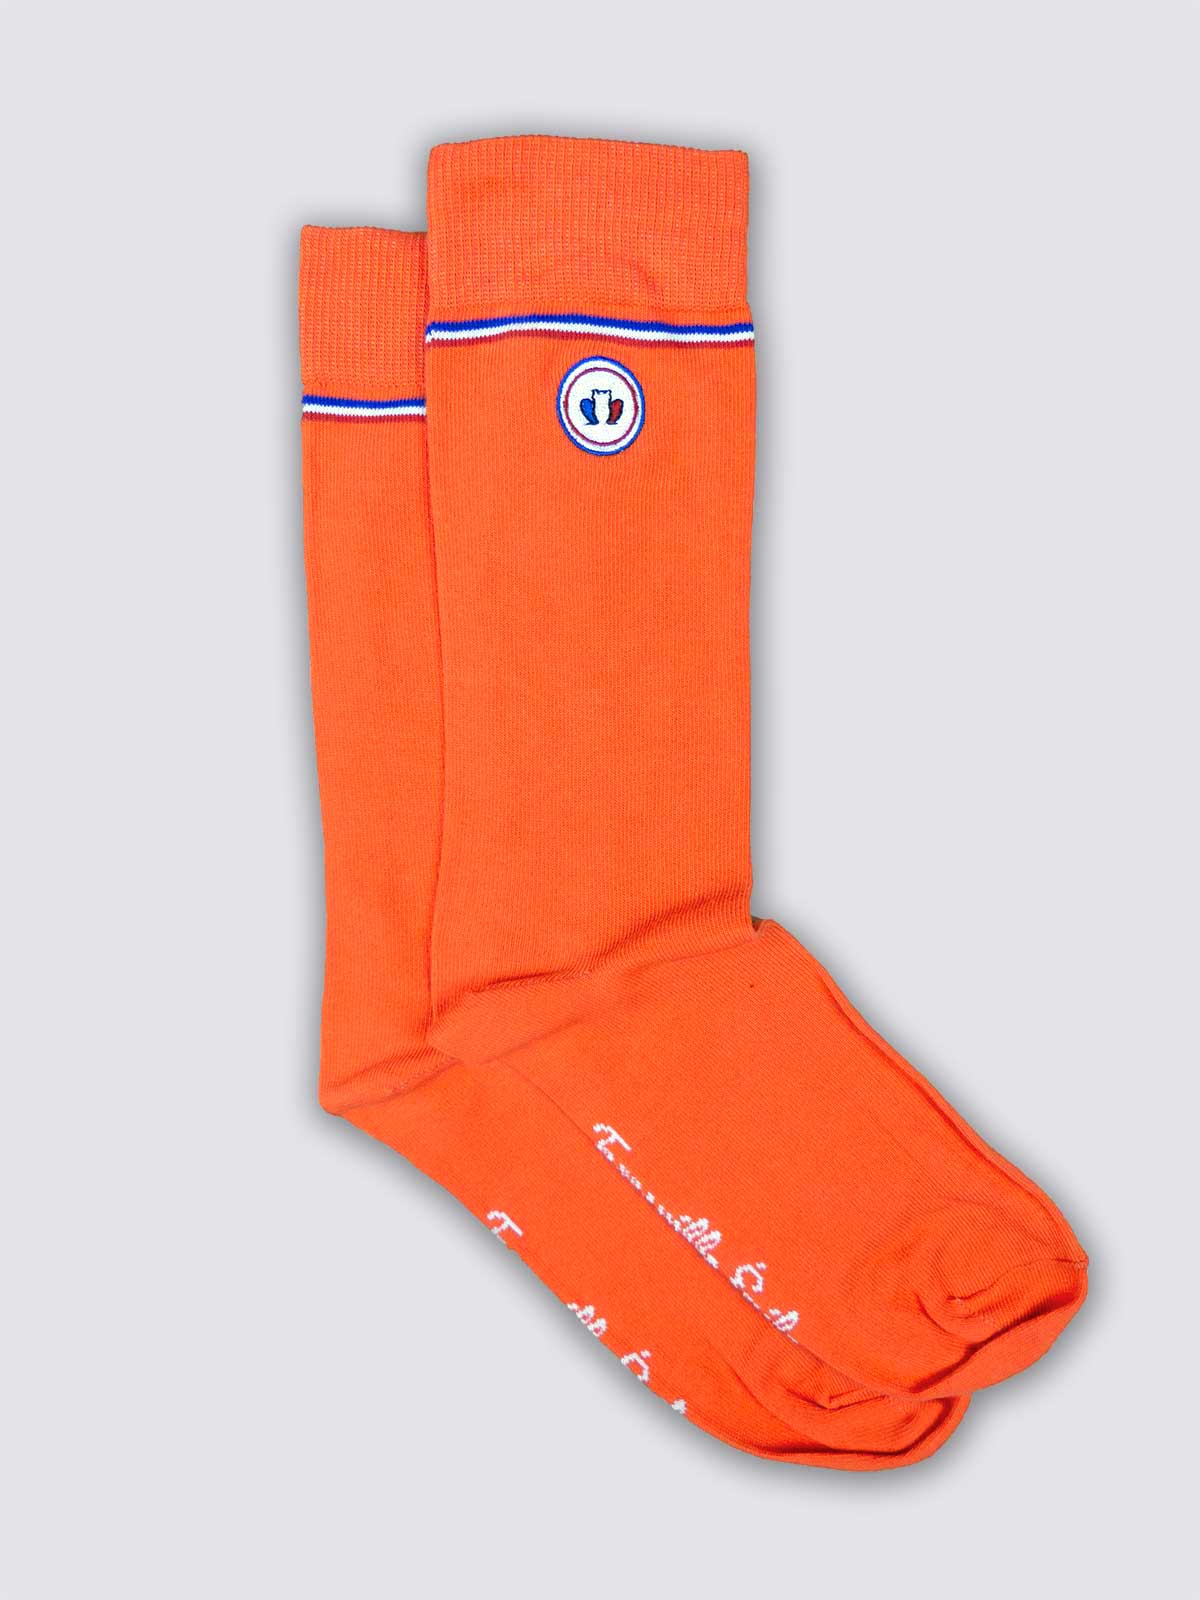 chaussettes-made-in-france-les-unies-orange-1